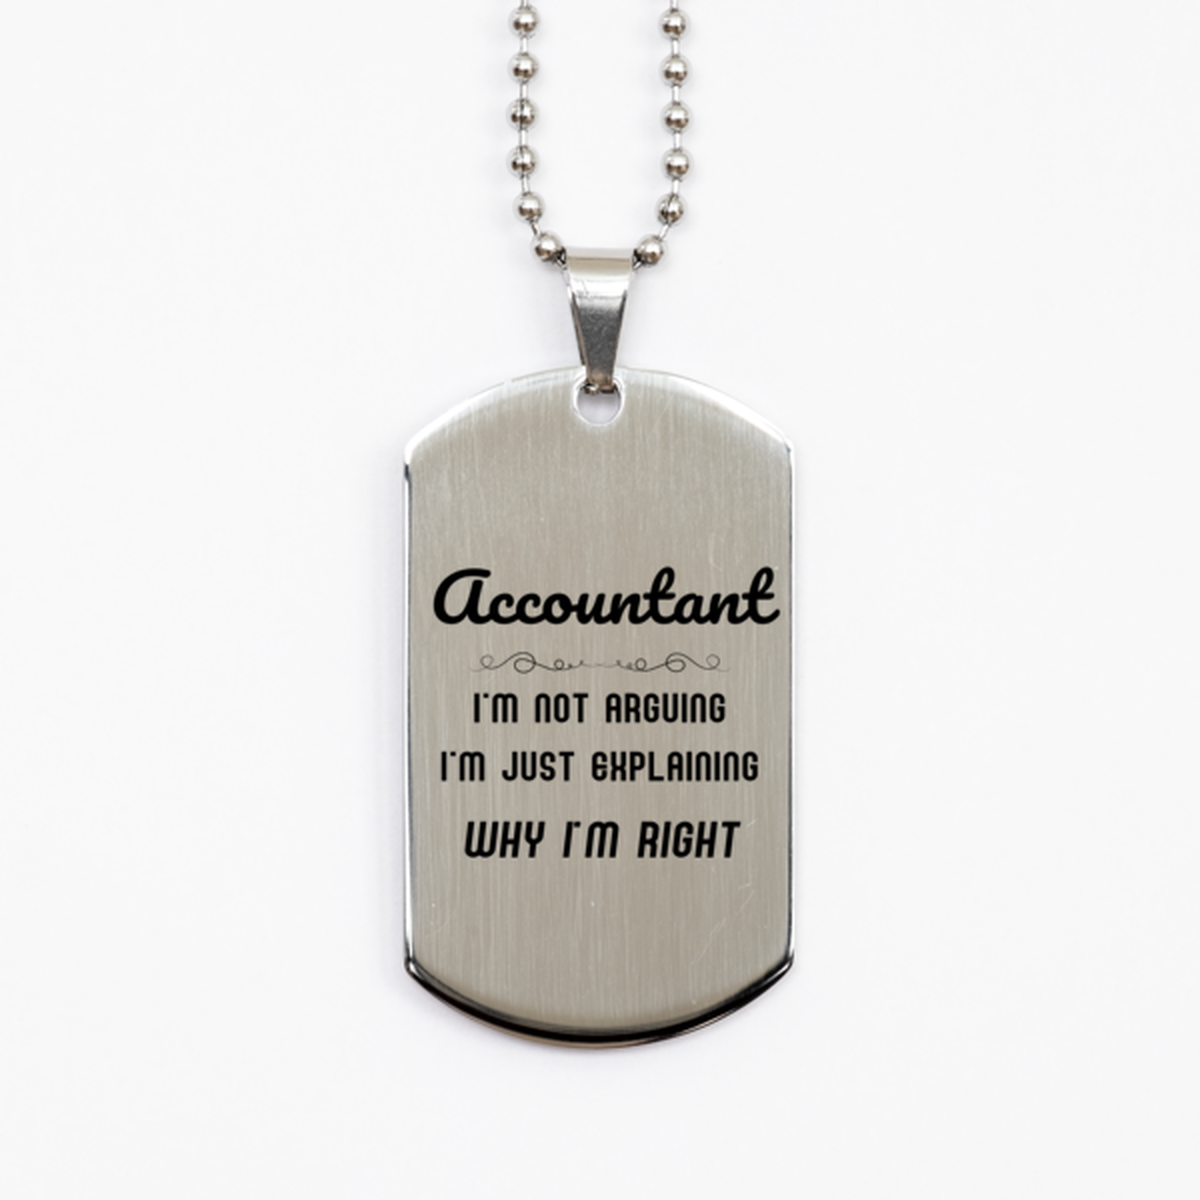 Accountant I'm not Arguing. I'm Just Explaining Why I'm RIGHT Silver Dog Tag, Funny Saying Quote Accountant Gifts For Accountant Graduation Birthday Christmas Gifts for Men Women Coworker